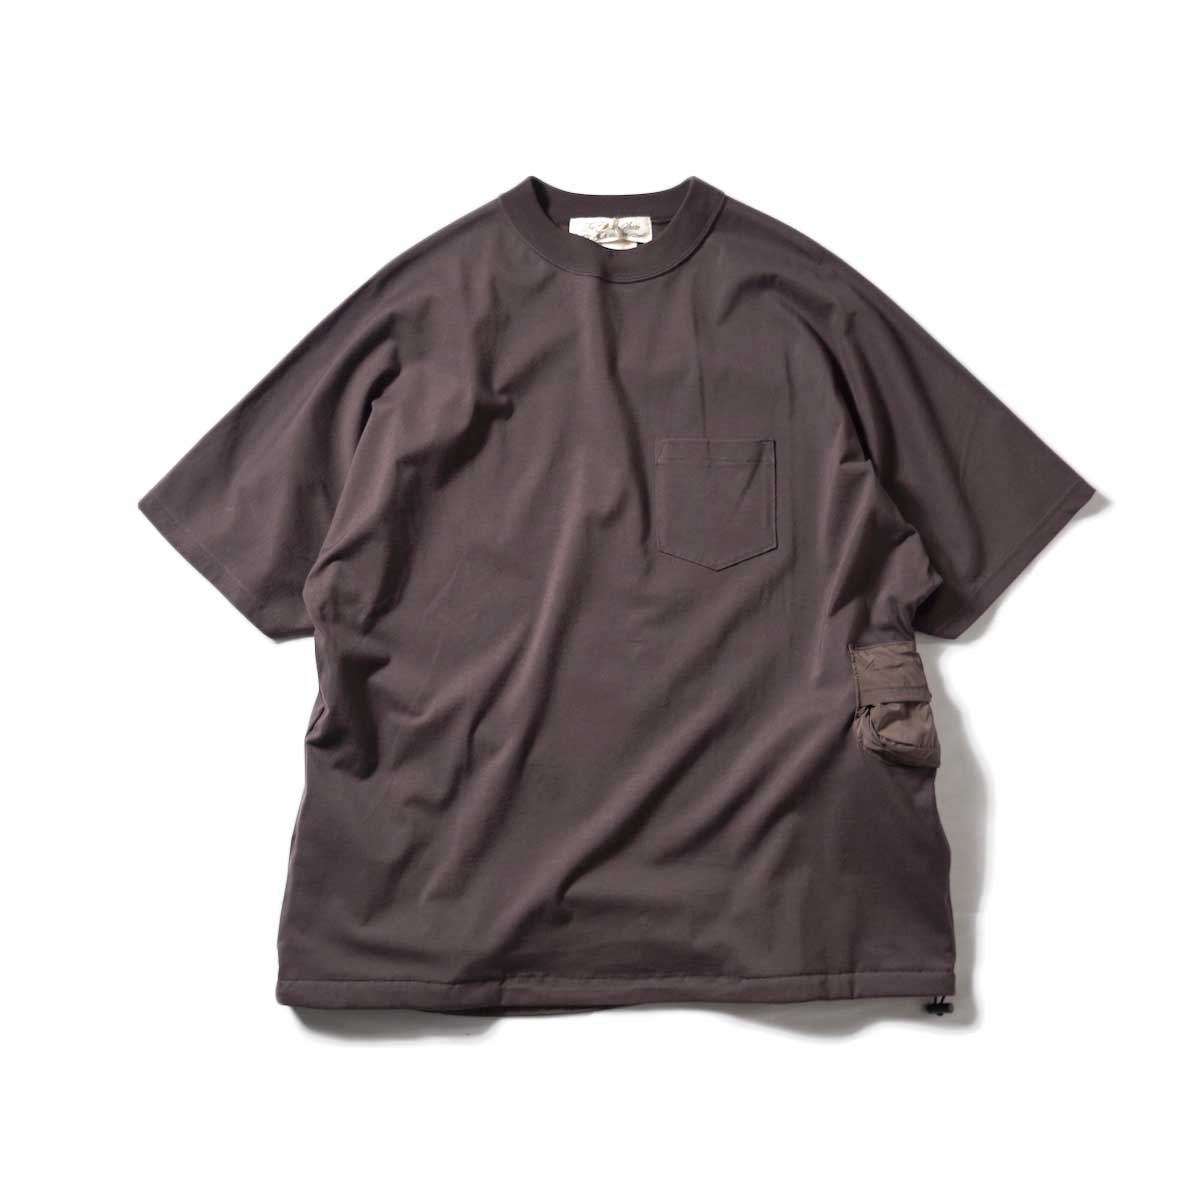 REMI RELIEF / エコバッグ付きノンストレス25/-天竺T (Brown)